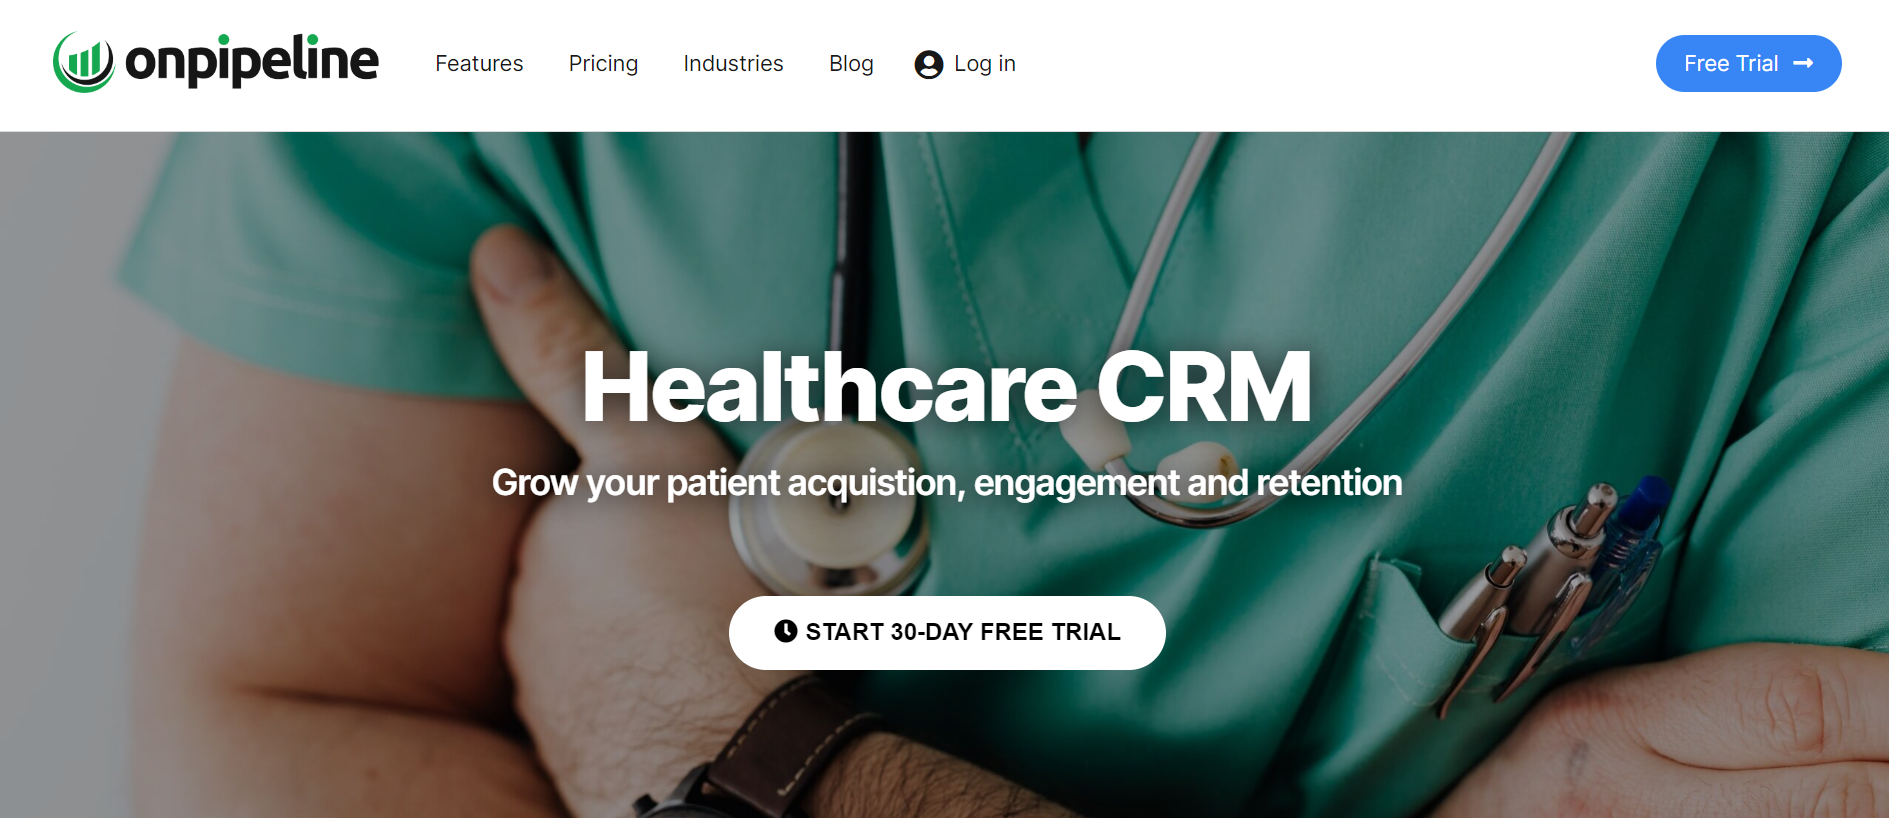 Onpipeline healthcare crm in the US